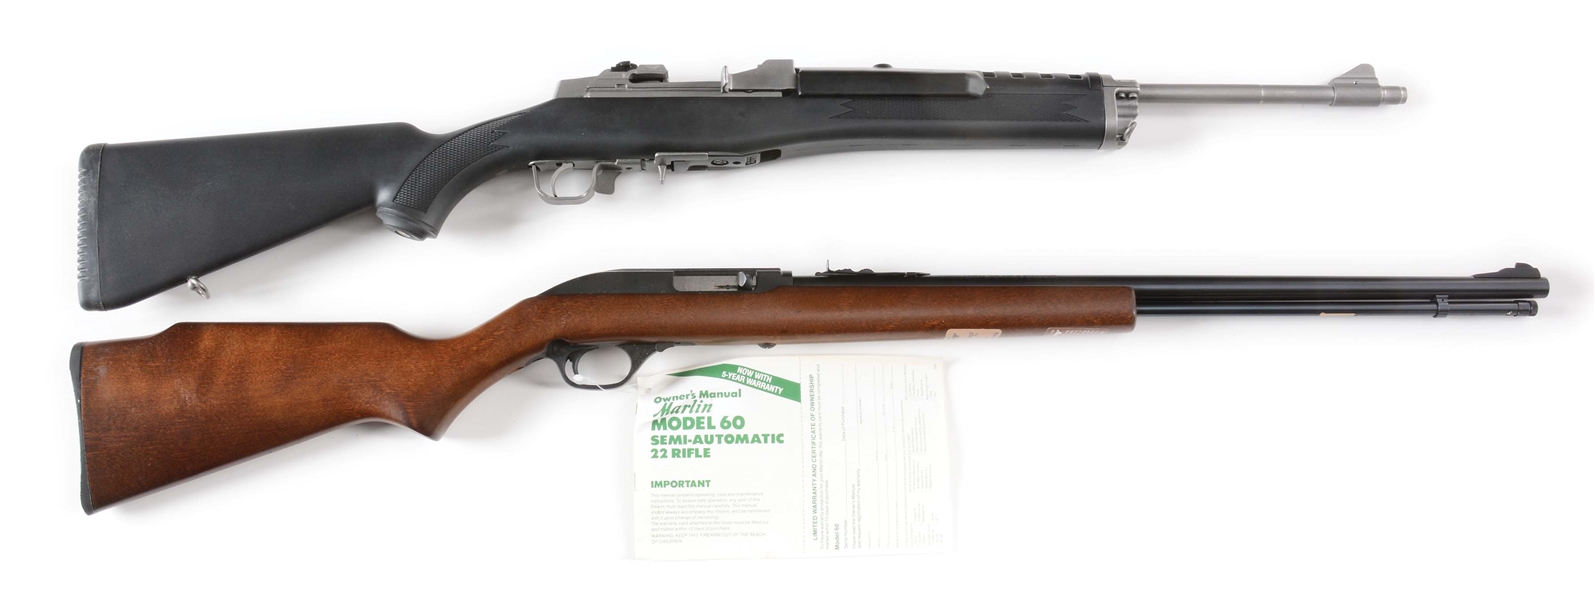 (M) LOT OF 2: BOXED RUGER AND MARLIN SEMI-AUTOMATIC RIFLES.